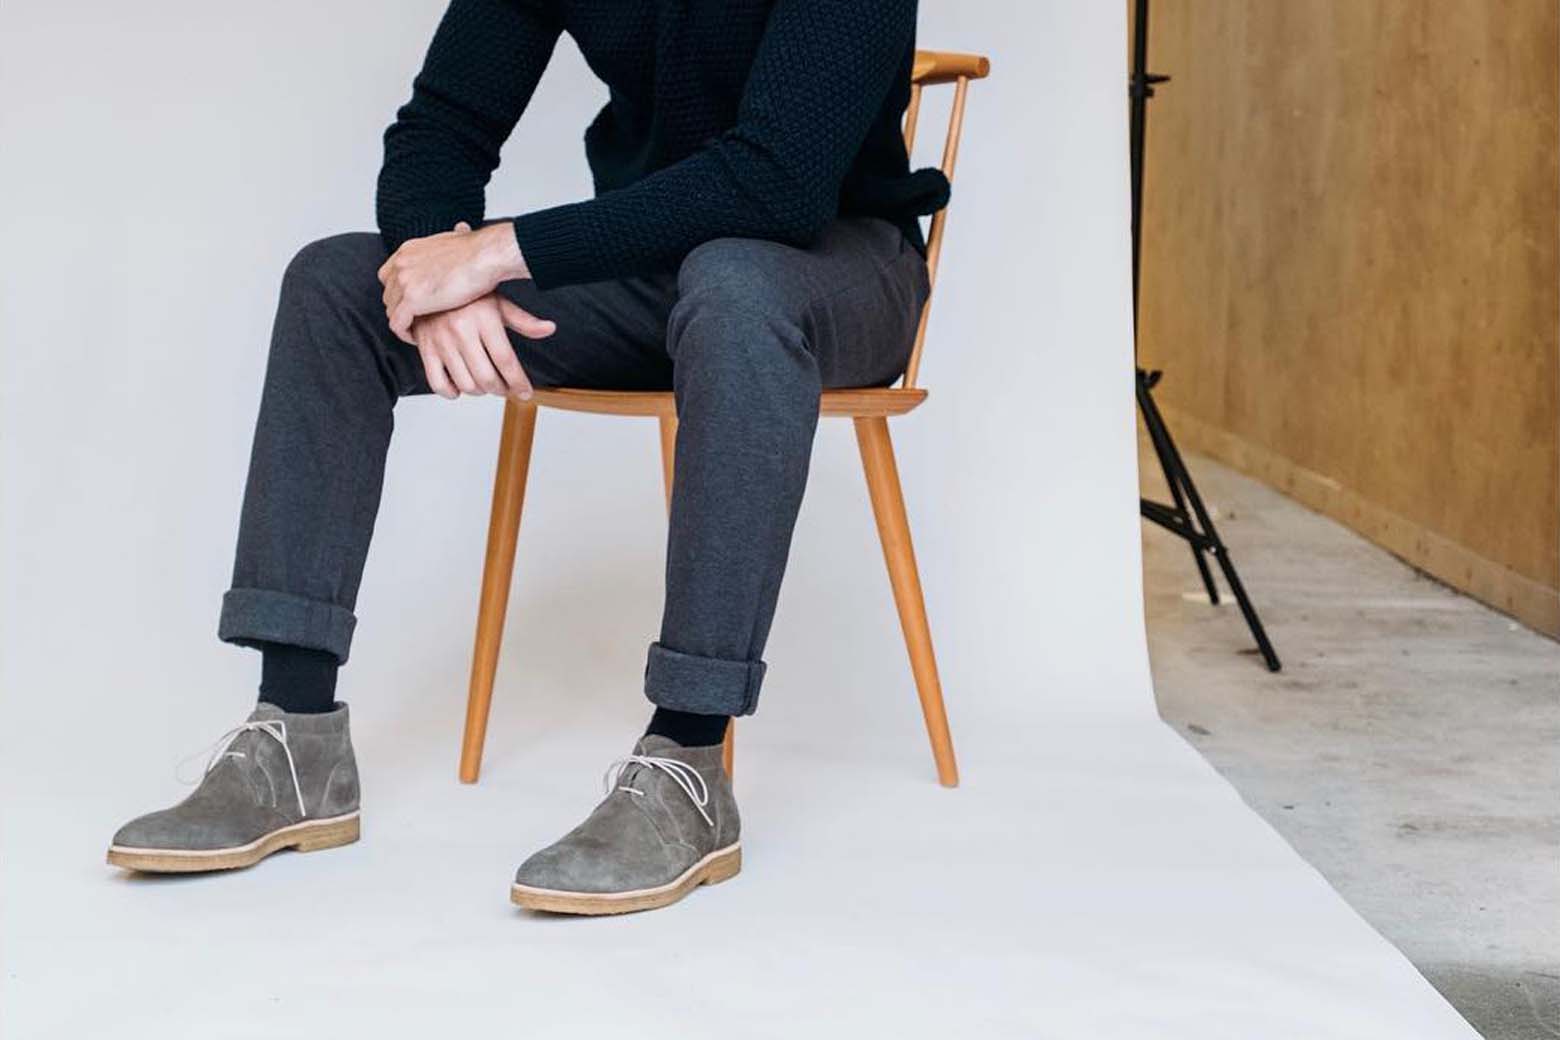 Oliver Cabell: What You Need To Know About The Shoe Brand